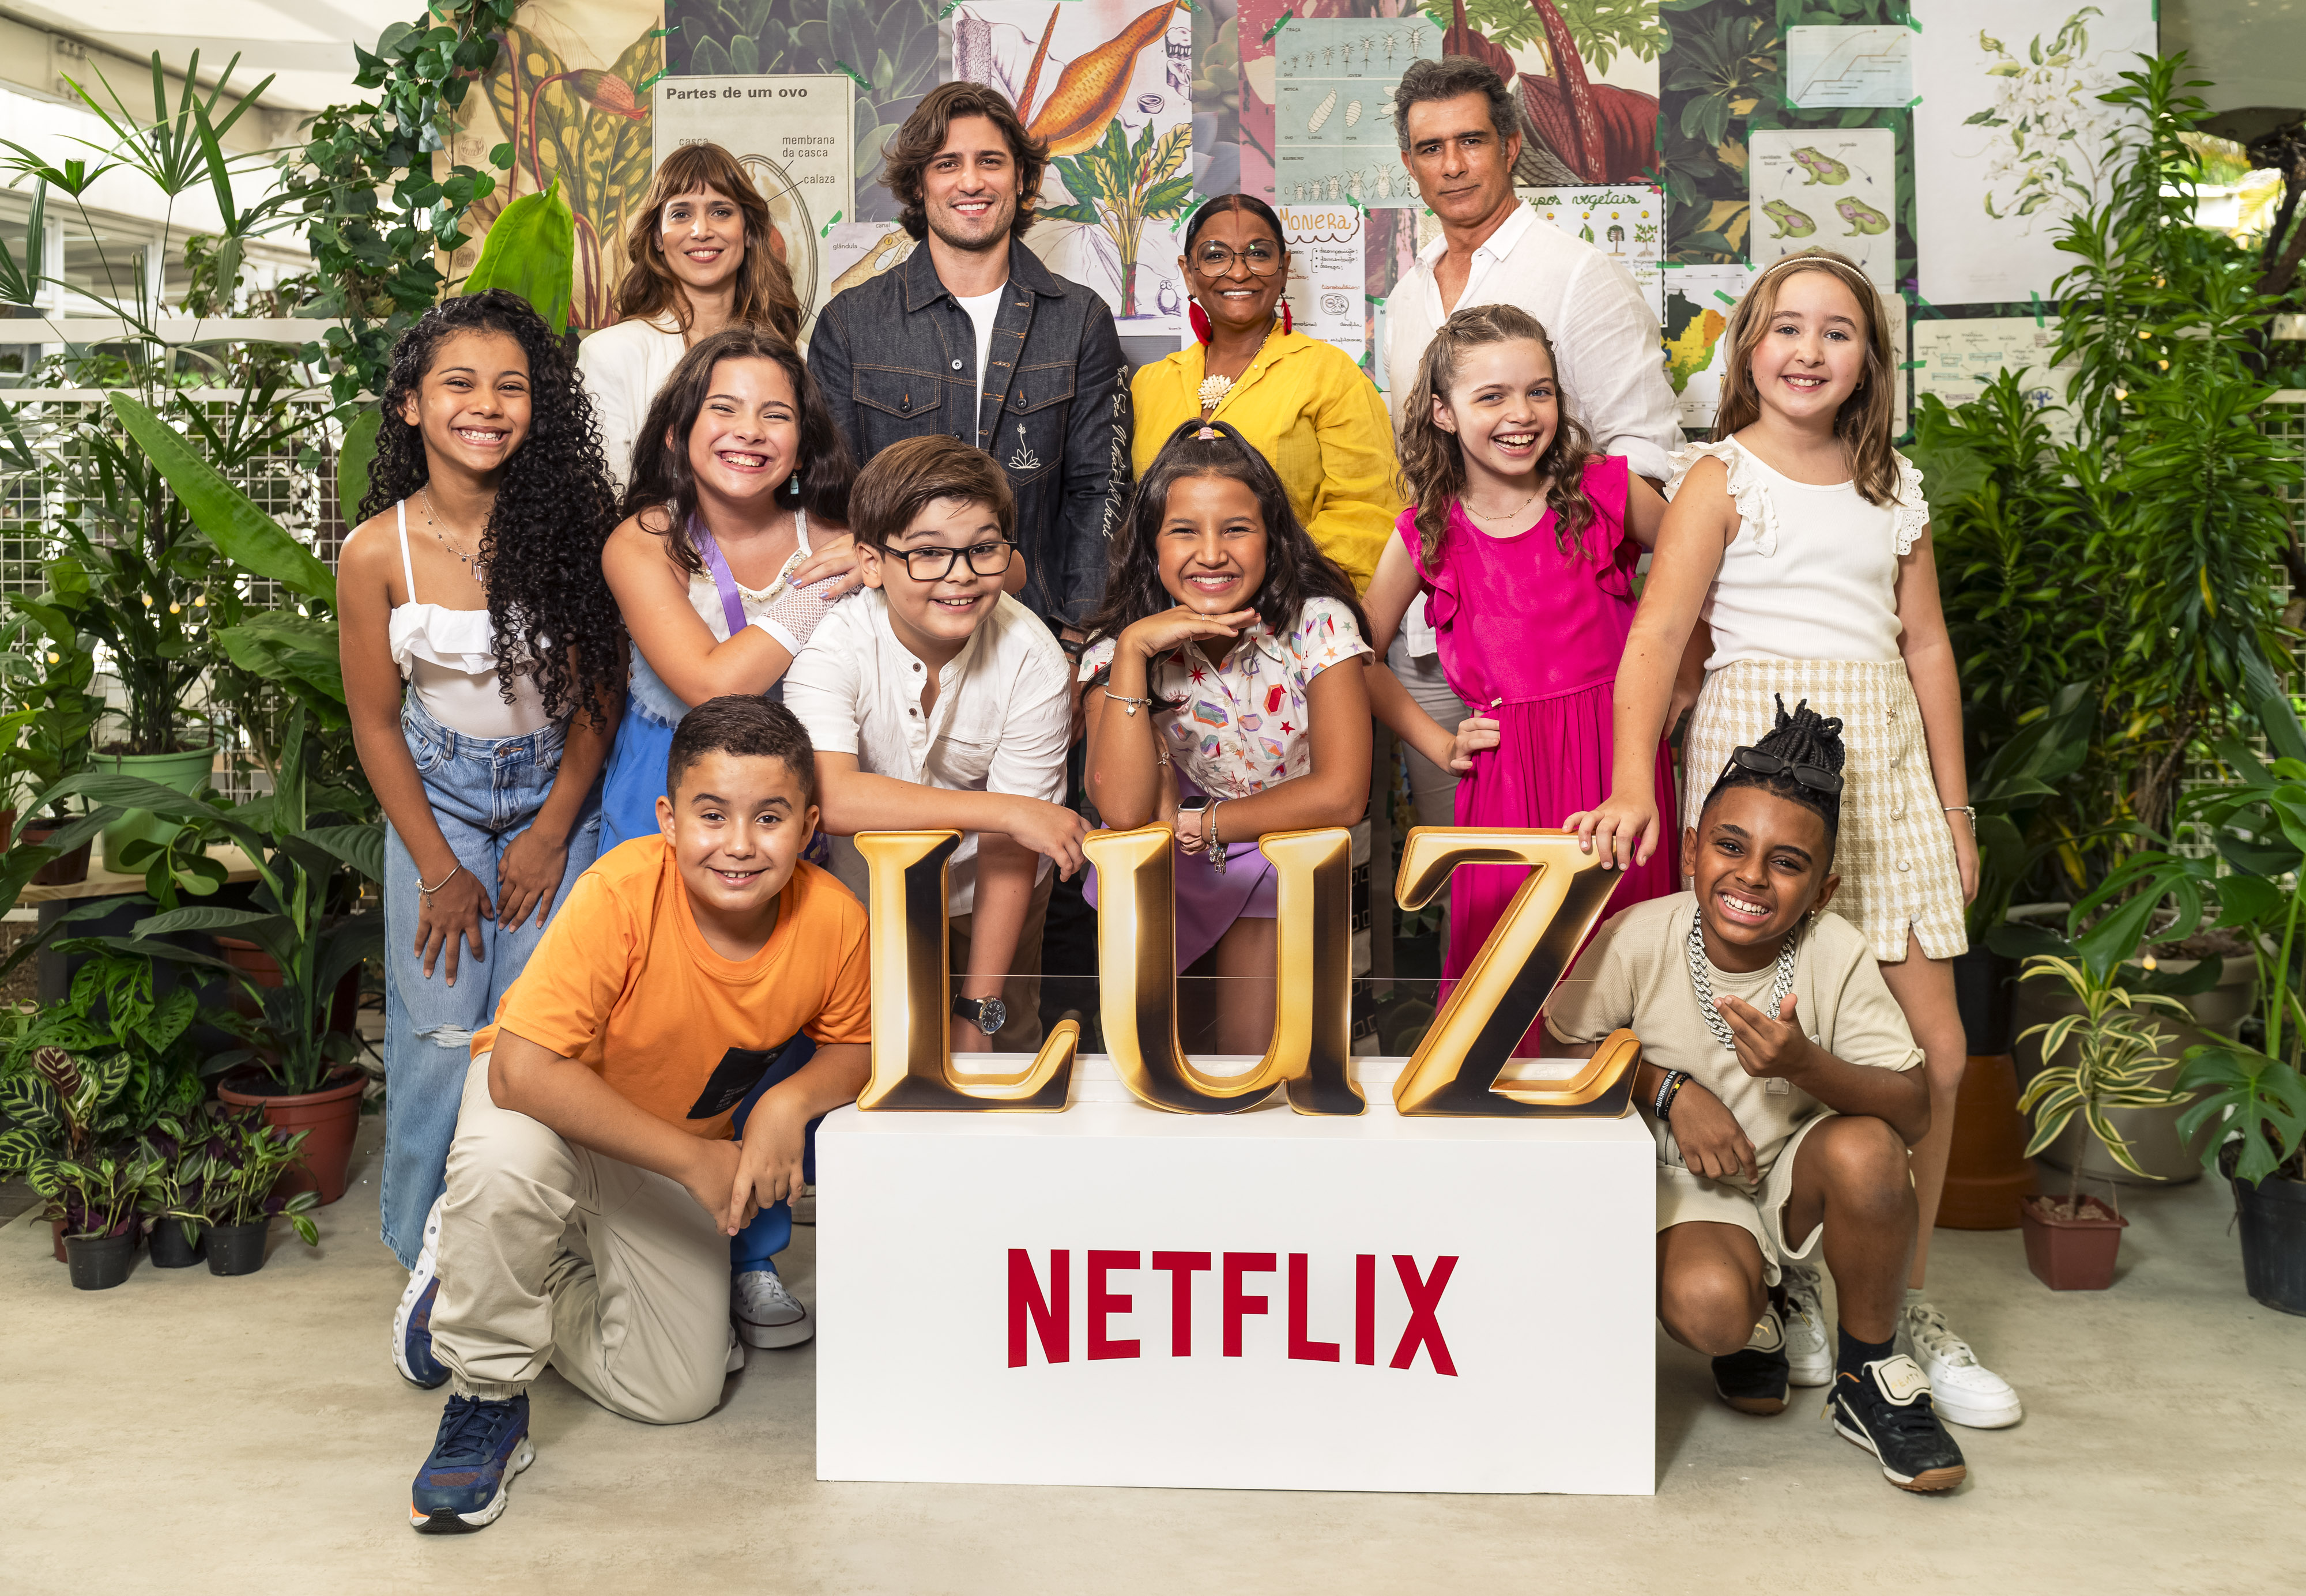 Netflix Hosts a Play-Filled Event to Celebrate the Debut of 'Luz: The Light  of the Heart' - About Netflix